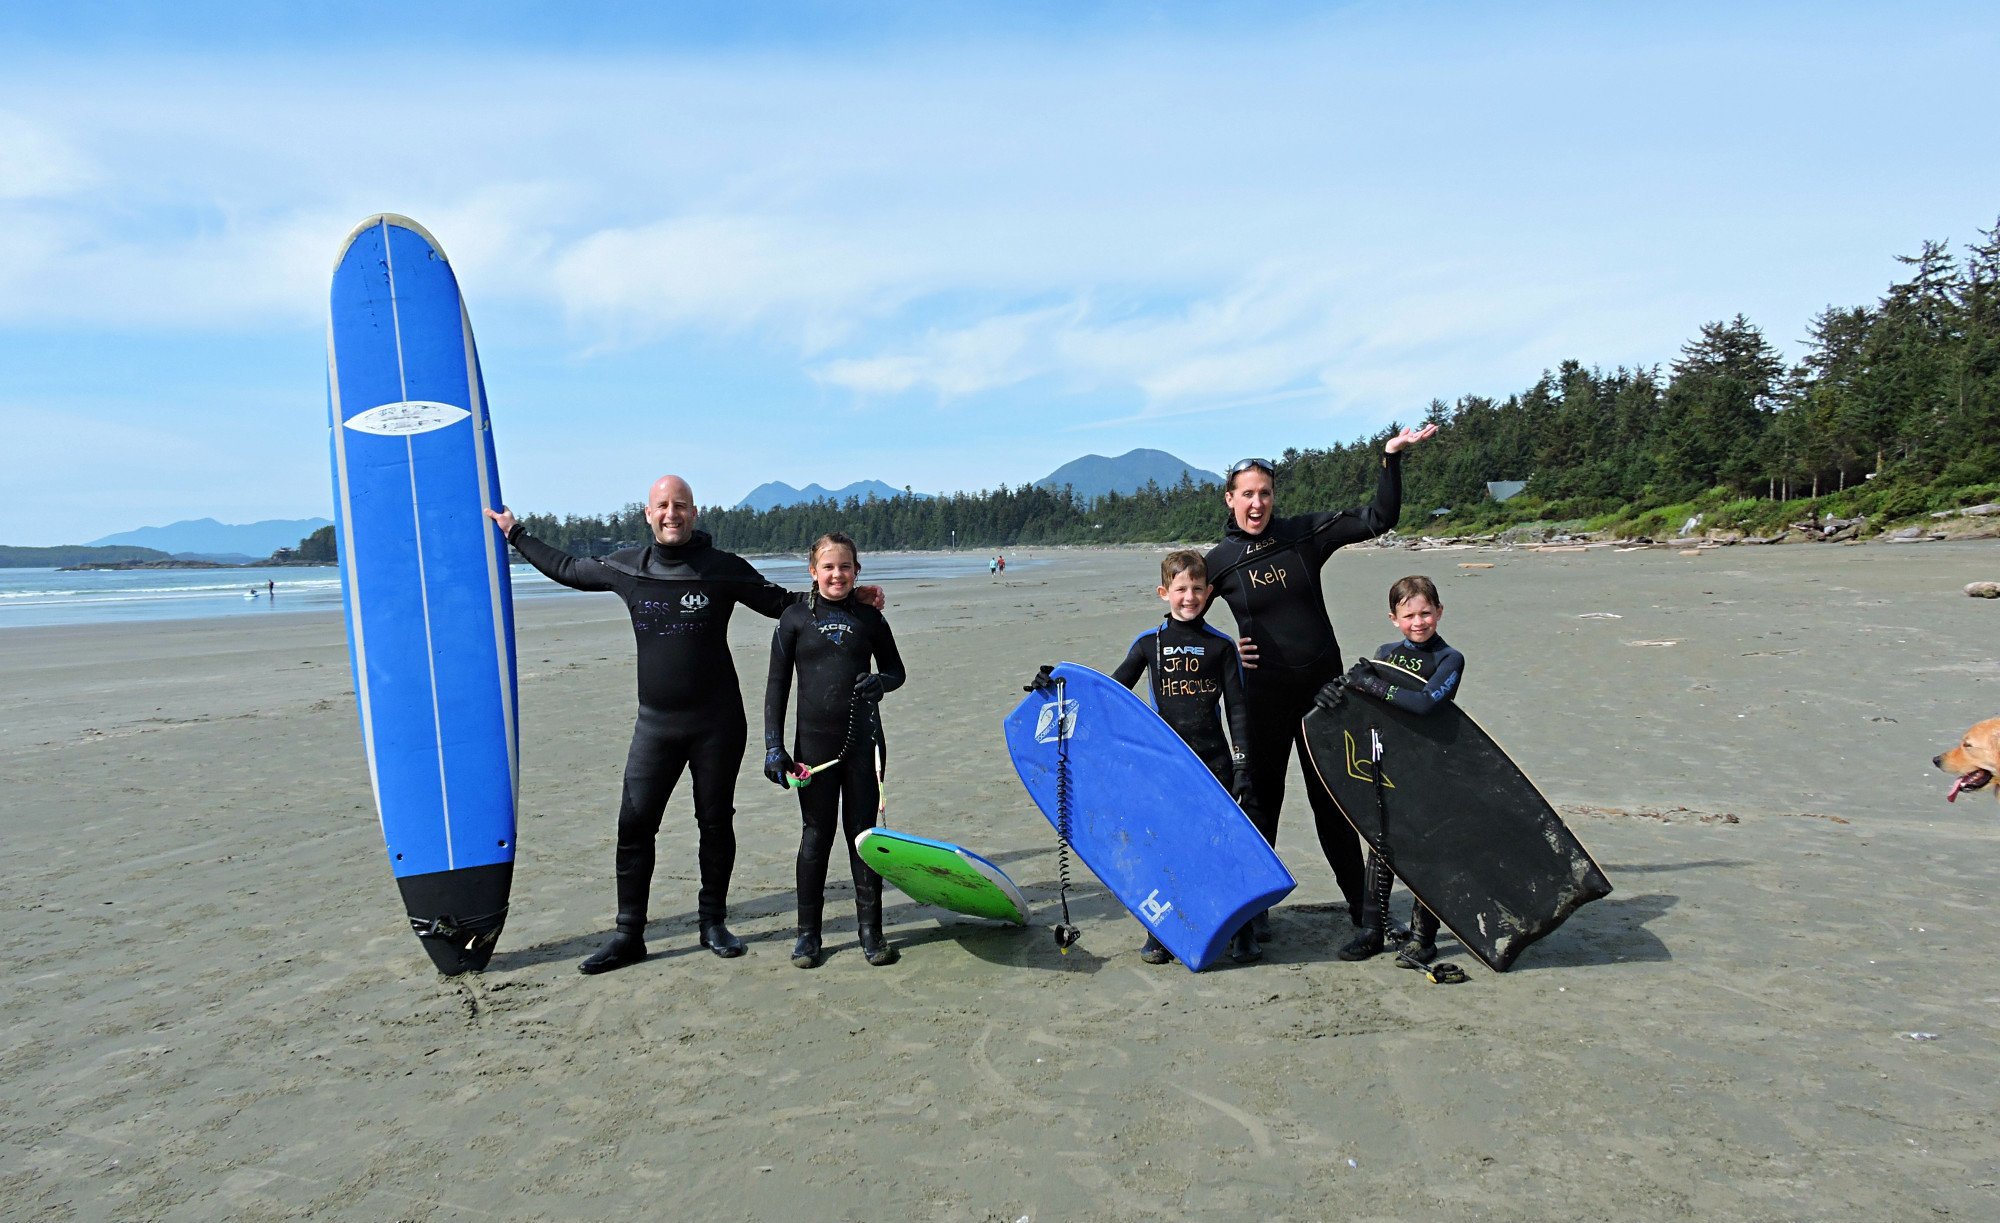 Tofino Wetsuit, where to rent wetsuits in tofino, where to rent surf boards in tofino, Tofino, Vancouver Island serving, Tofino surf rentals, Tofino surf lessons, Tofino Surf Adventures, Long Beach Surf Shop in Tofino,